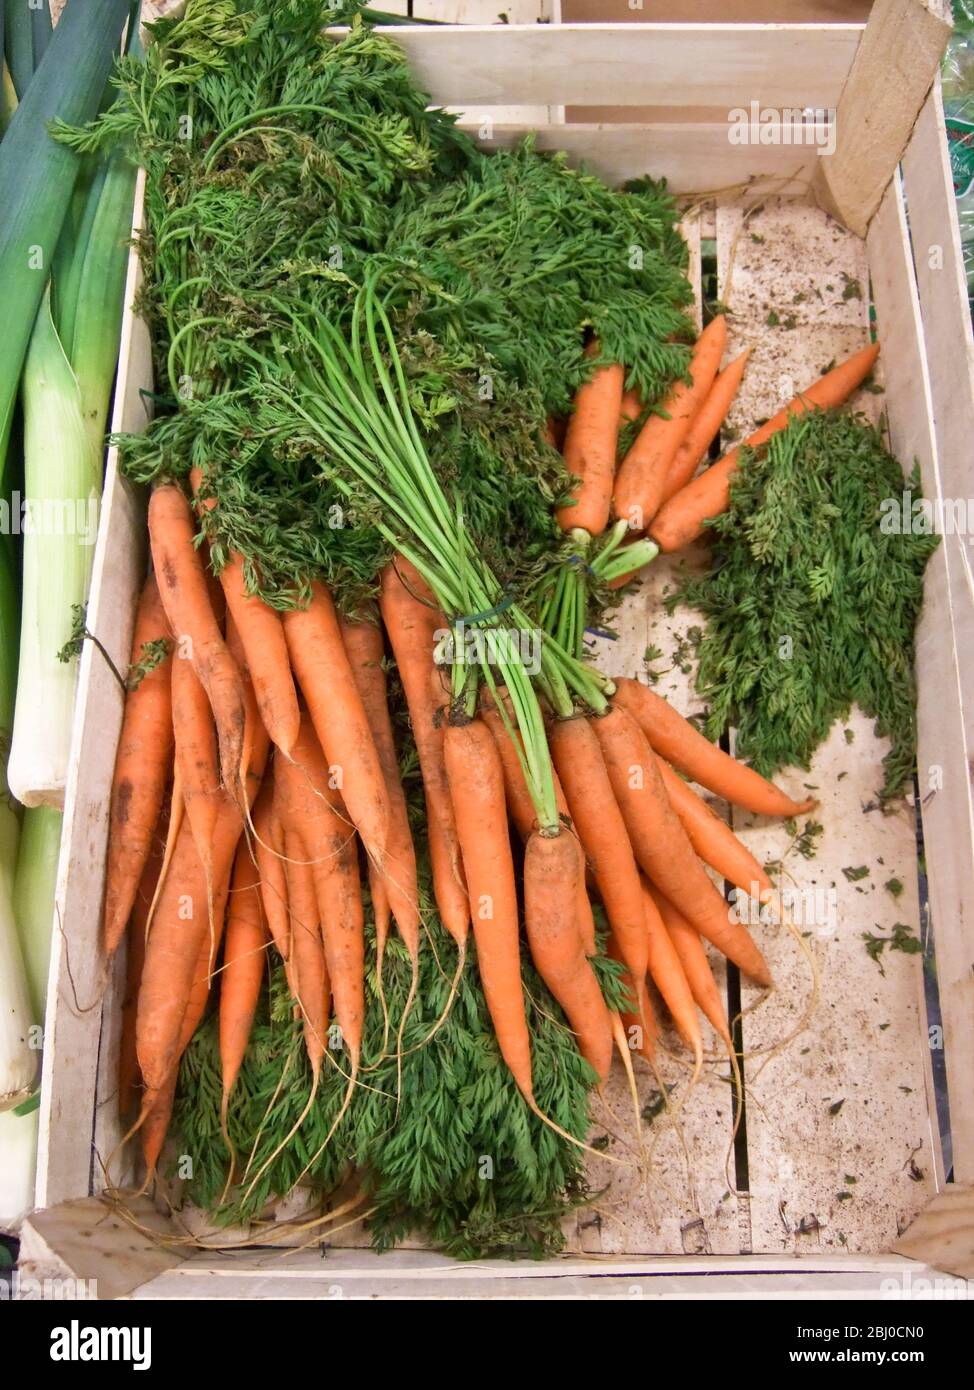 Bunches of carrots for sale in Swedish country store - Stock Photo